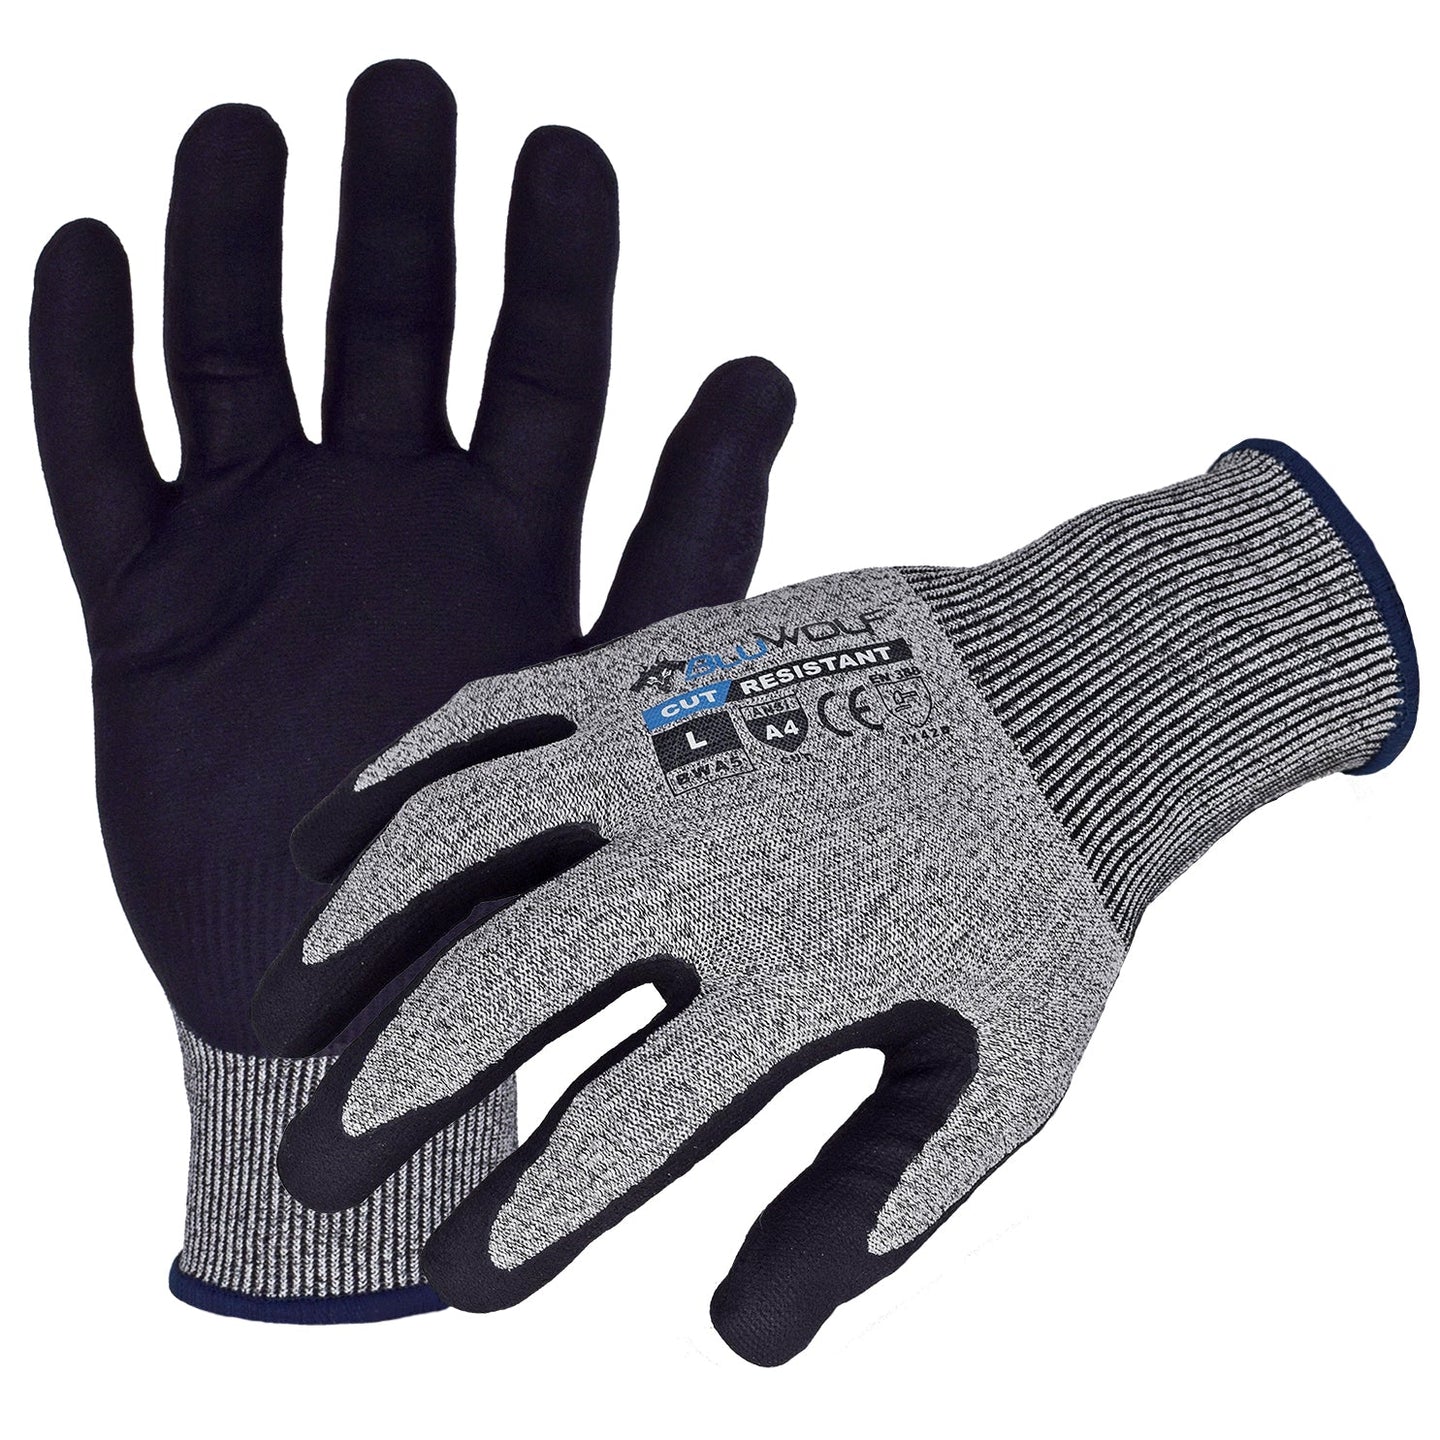 BluWolf(BW4040) Cut Resistant Work Gloves, 18-Gauge Gray Seamless ANSI A4 Cut Resistant Gloves w/ Black Ultra-Thin Micro-Foam Nitrile/Polyurethane Palm/Finger Coating, Large, Case of 12 Pairs